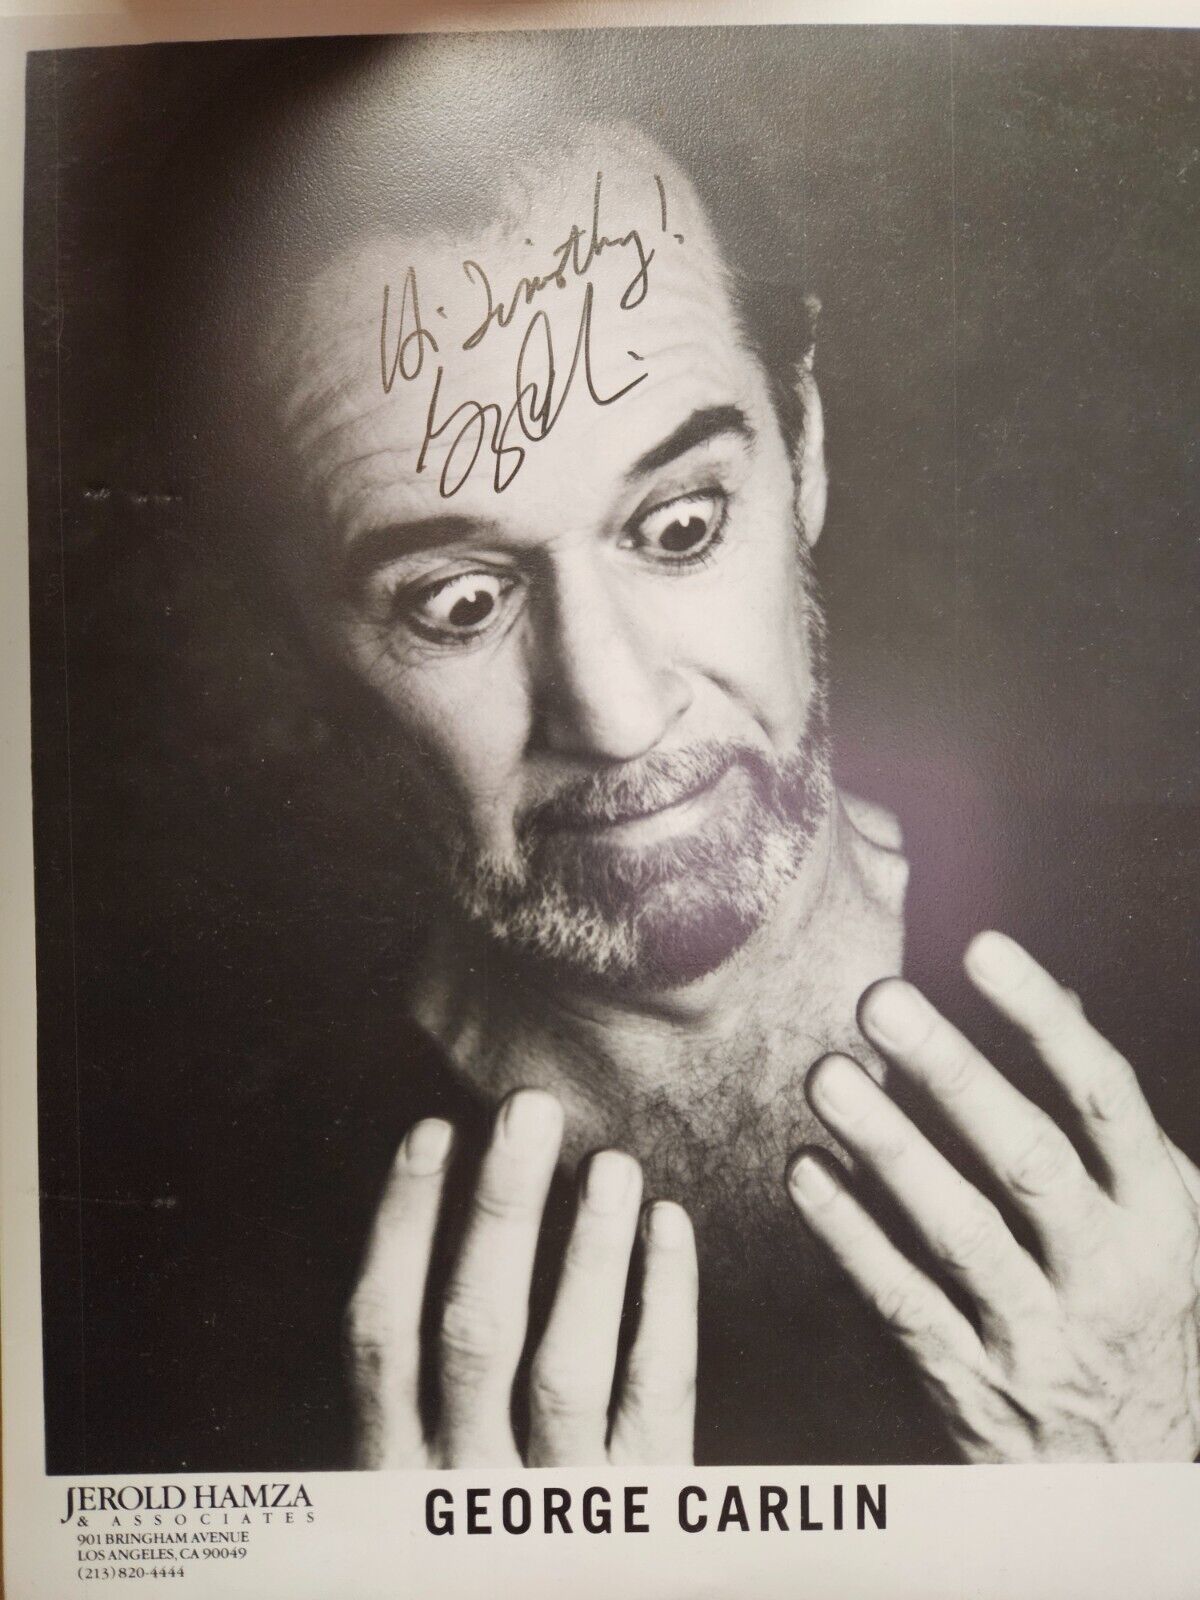 George Carlin Autographed 8x10 Photo Television Star Comedian Star - Hamza